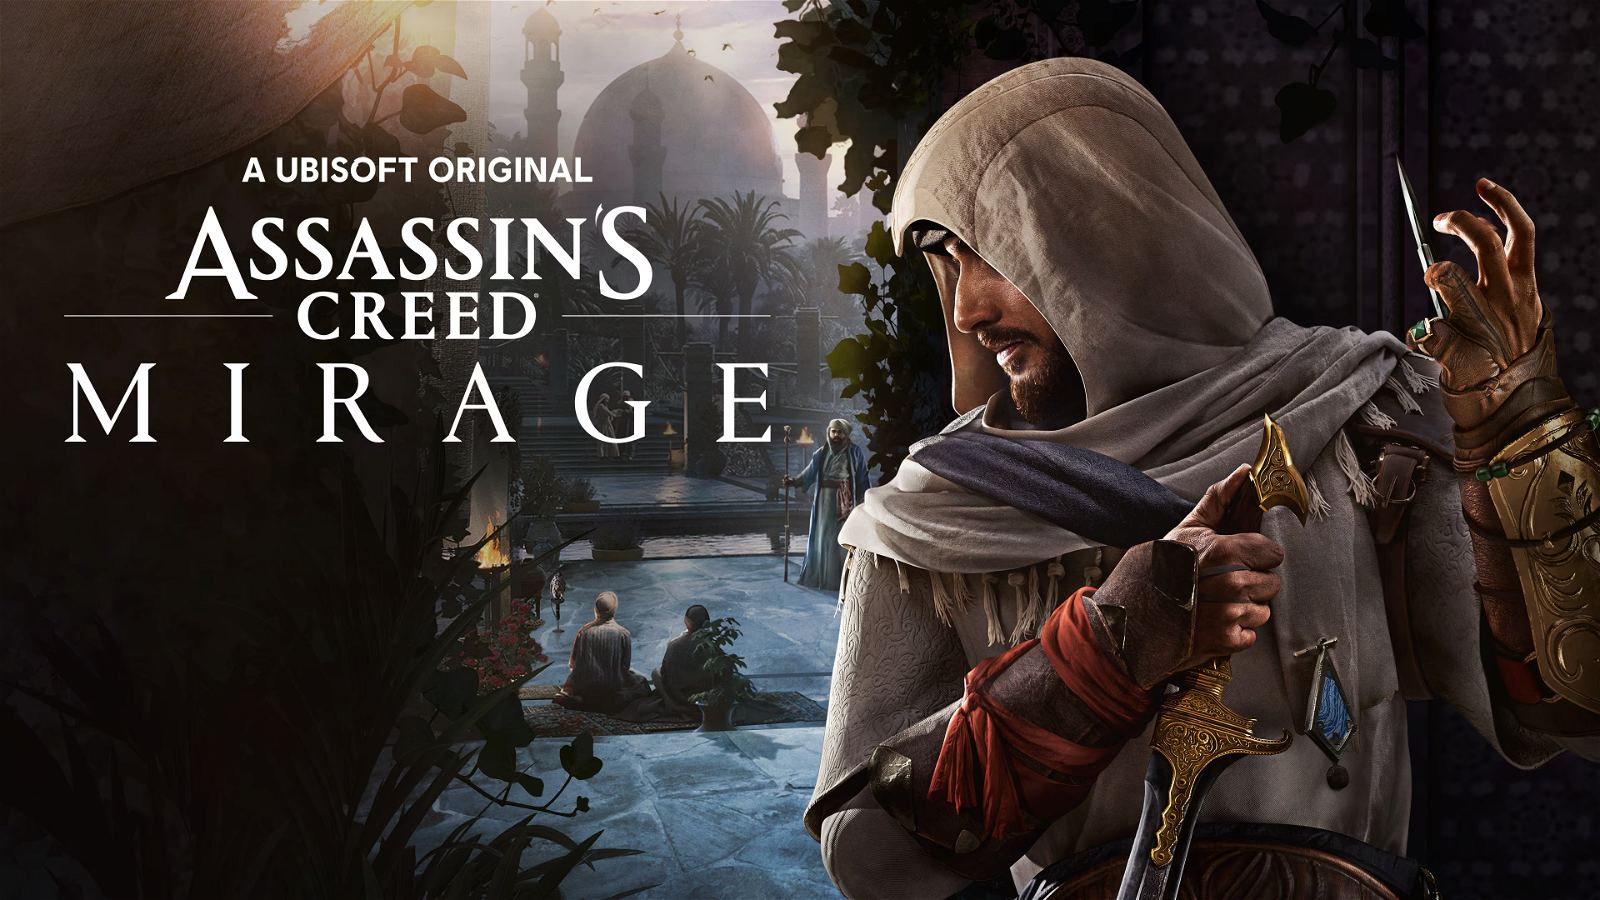 Assassin's Creed: Mirage, showing the protagonist of the game